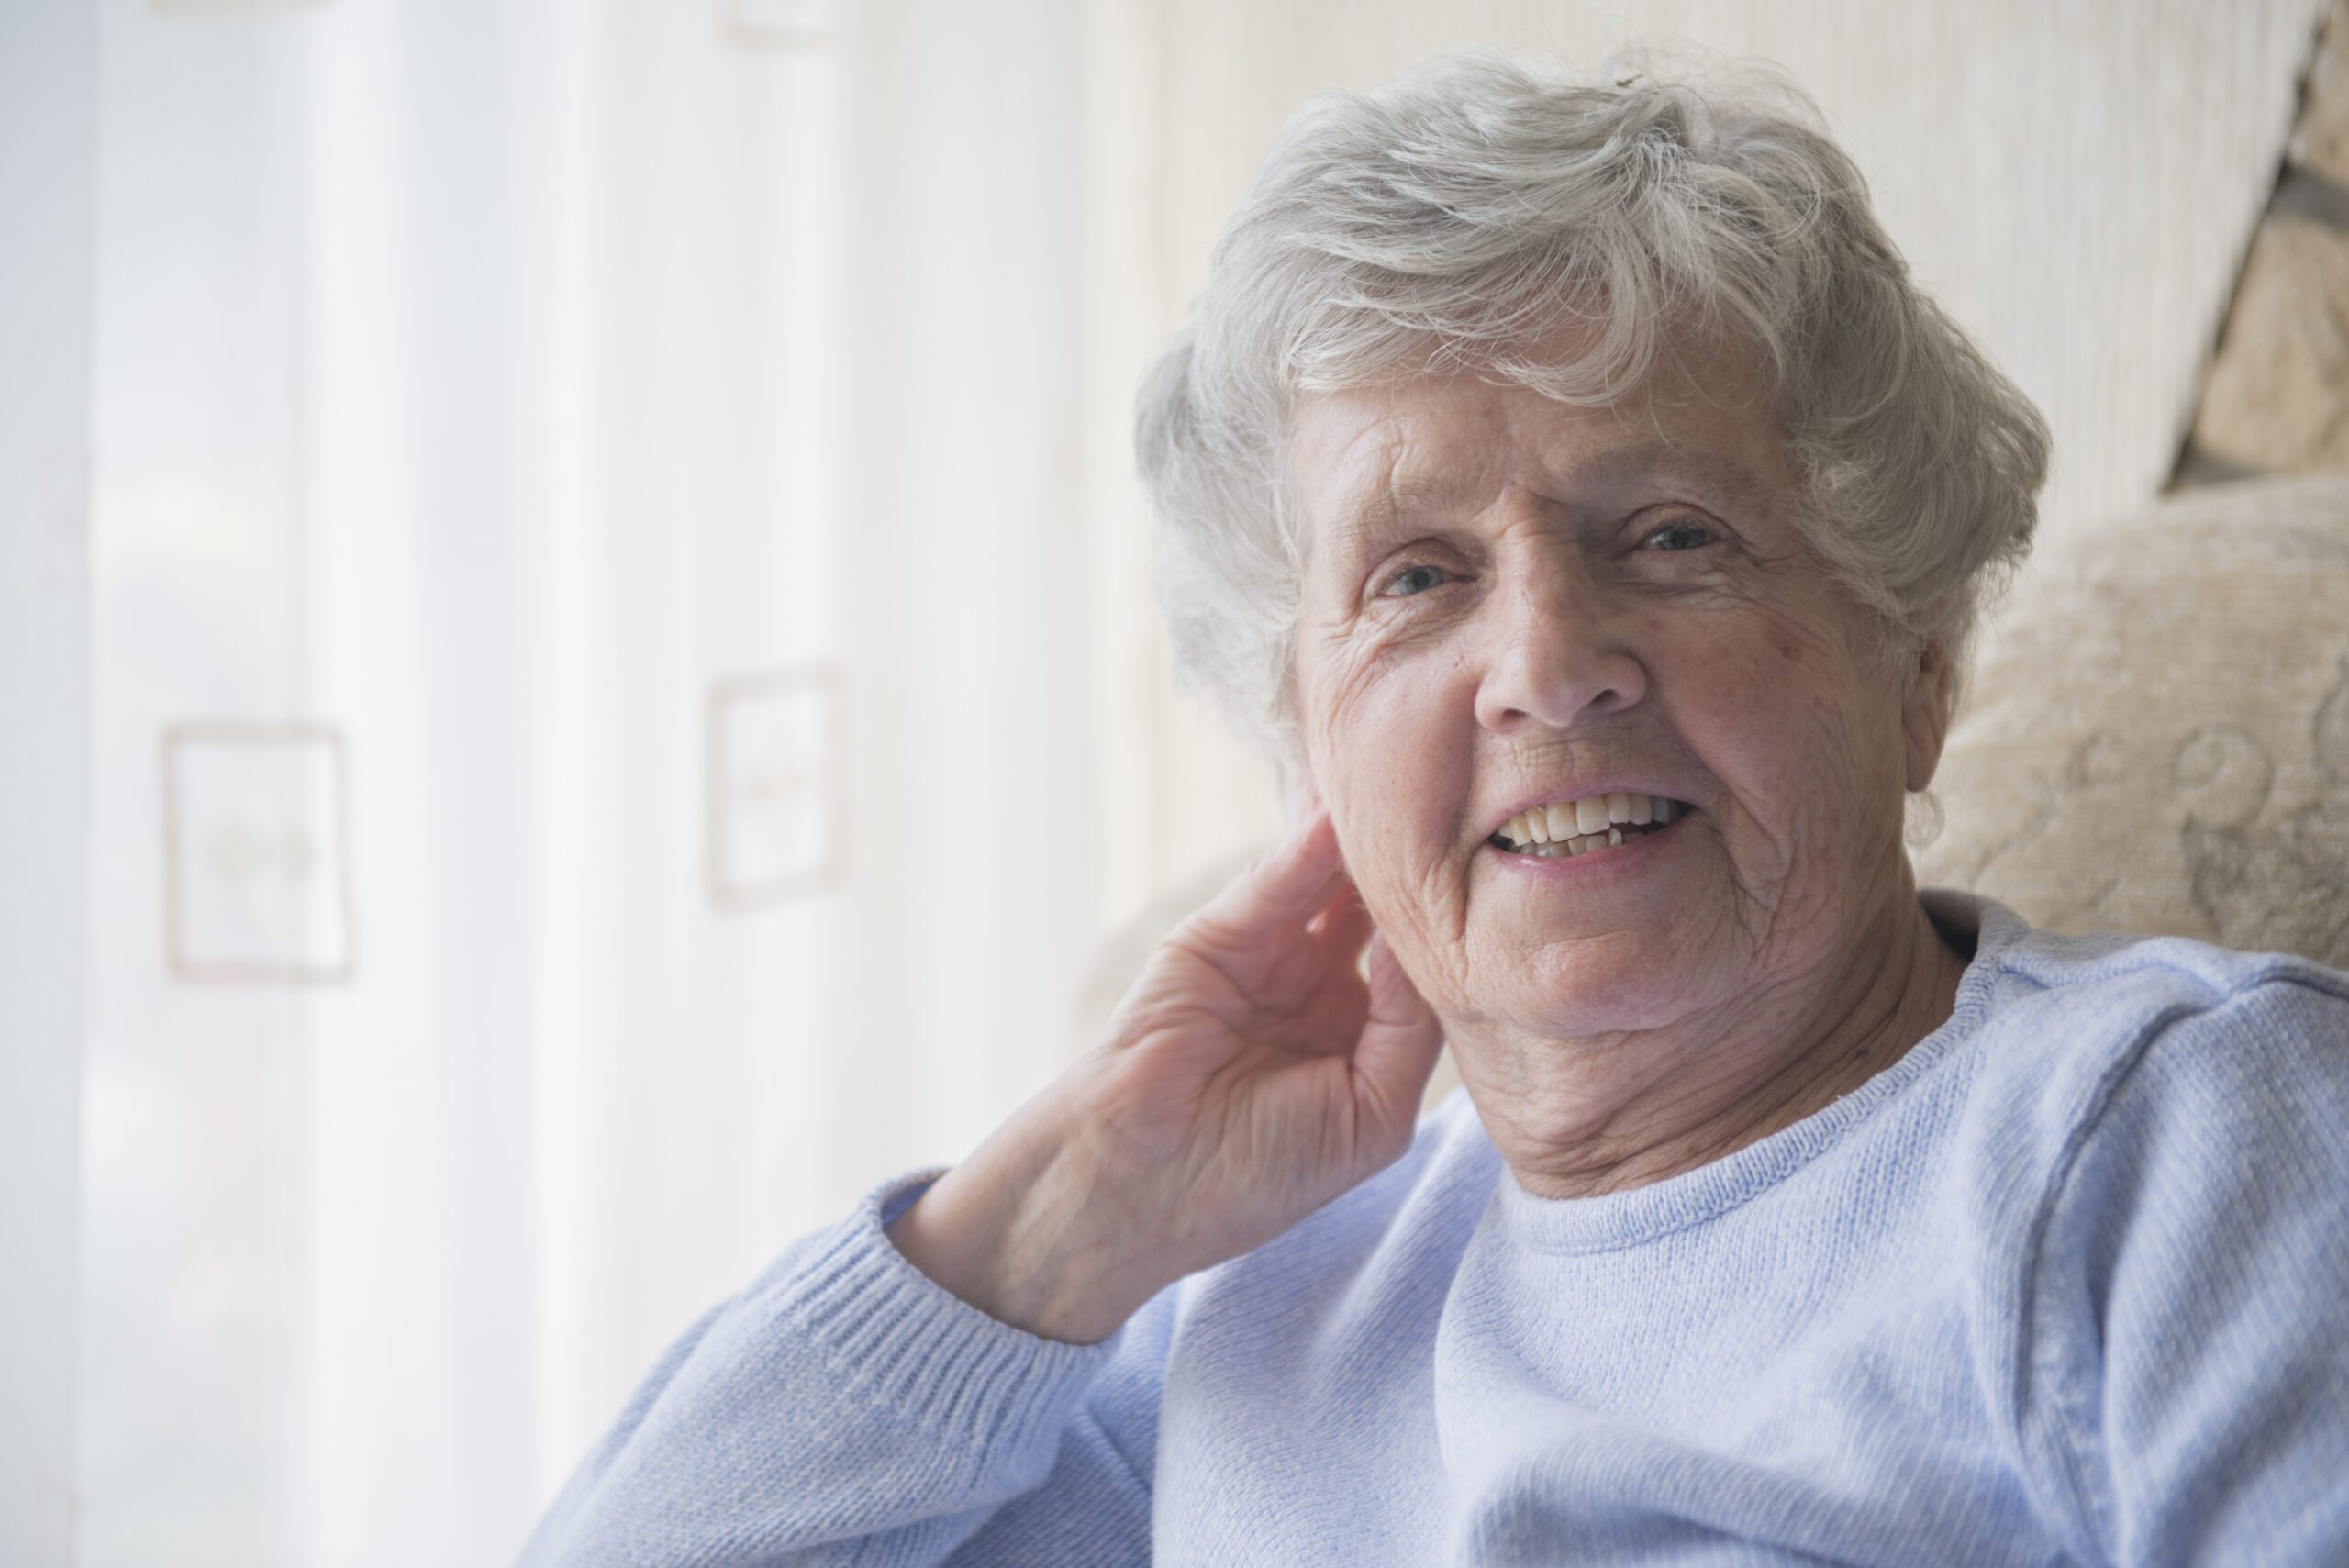 Winter Warmth Appeal 2022 - stock image of an older woman smiling.